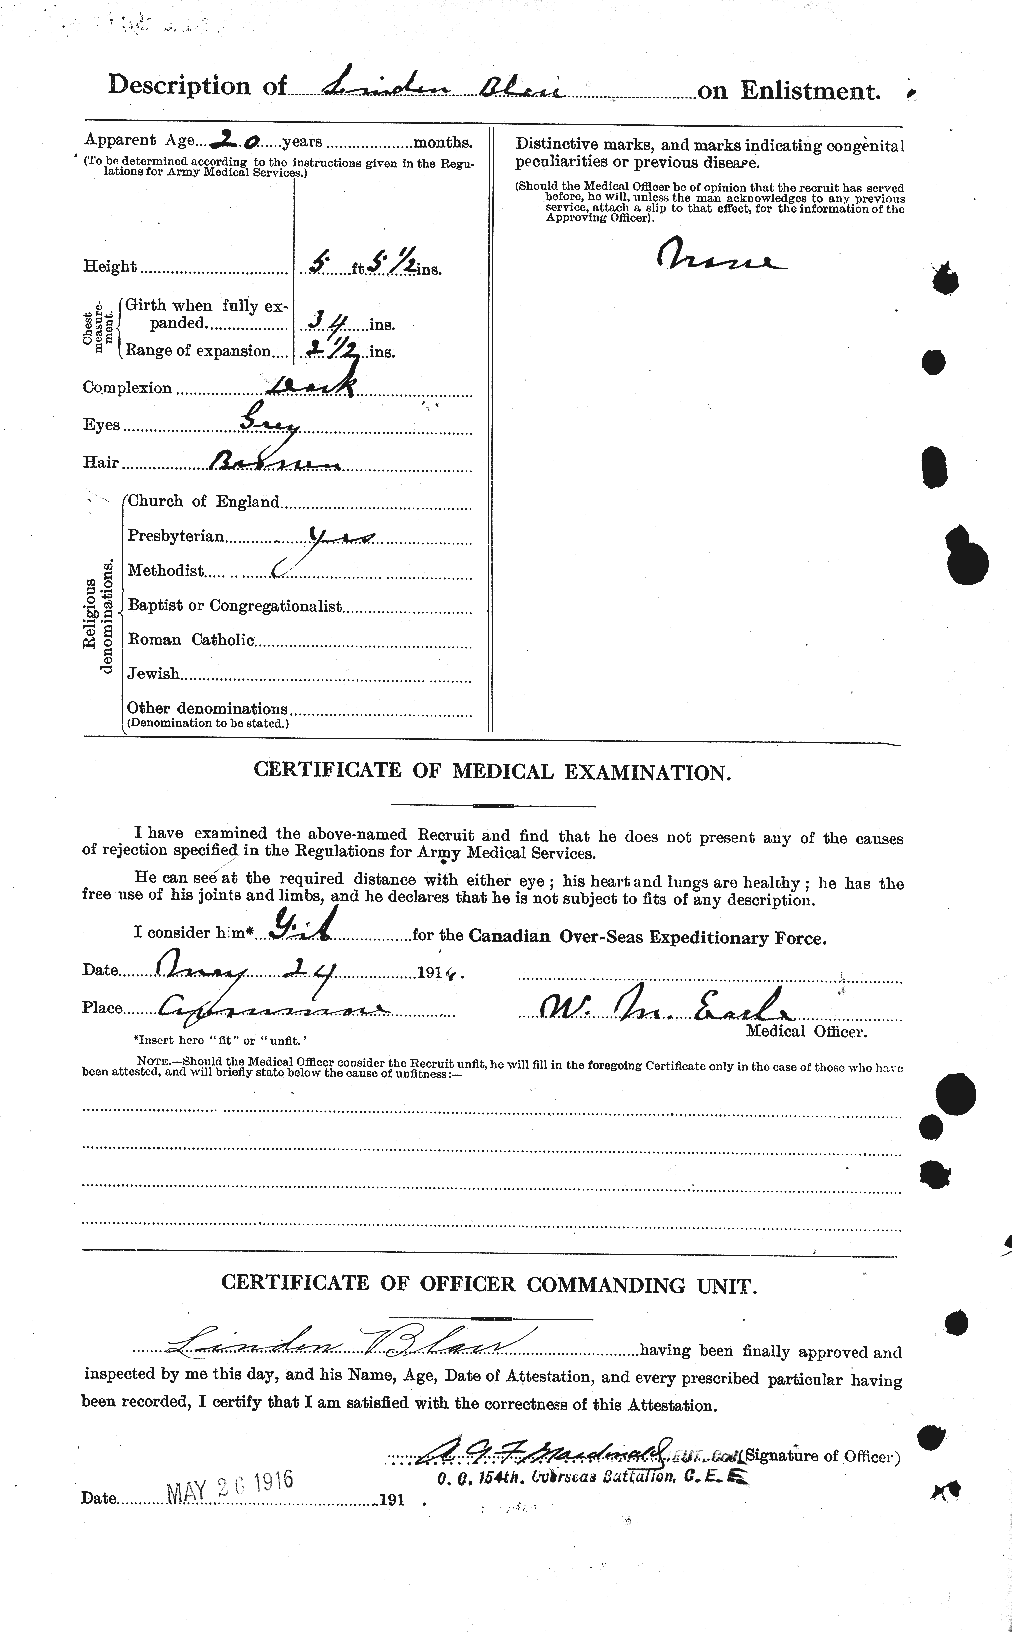 Personnel Records of the First World War - CEF 243113b